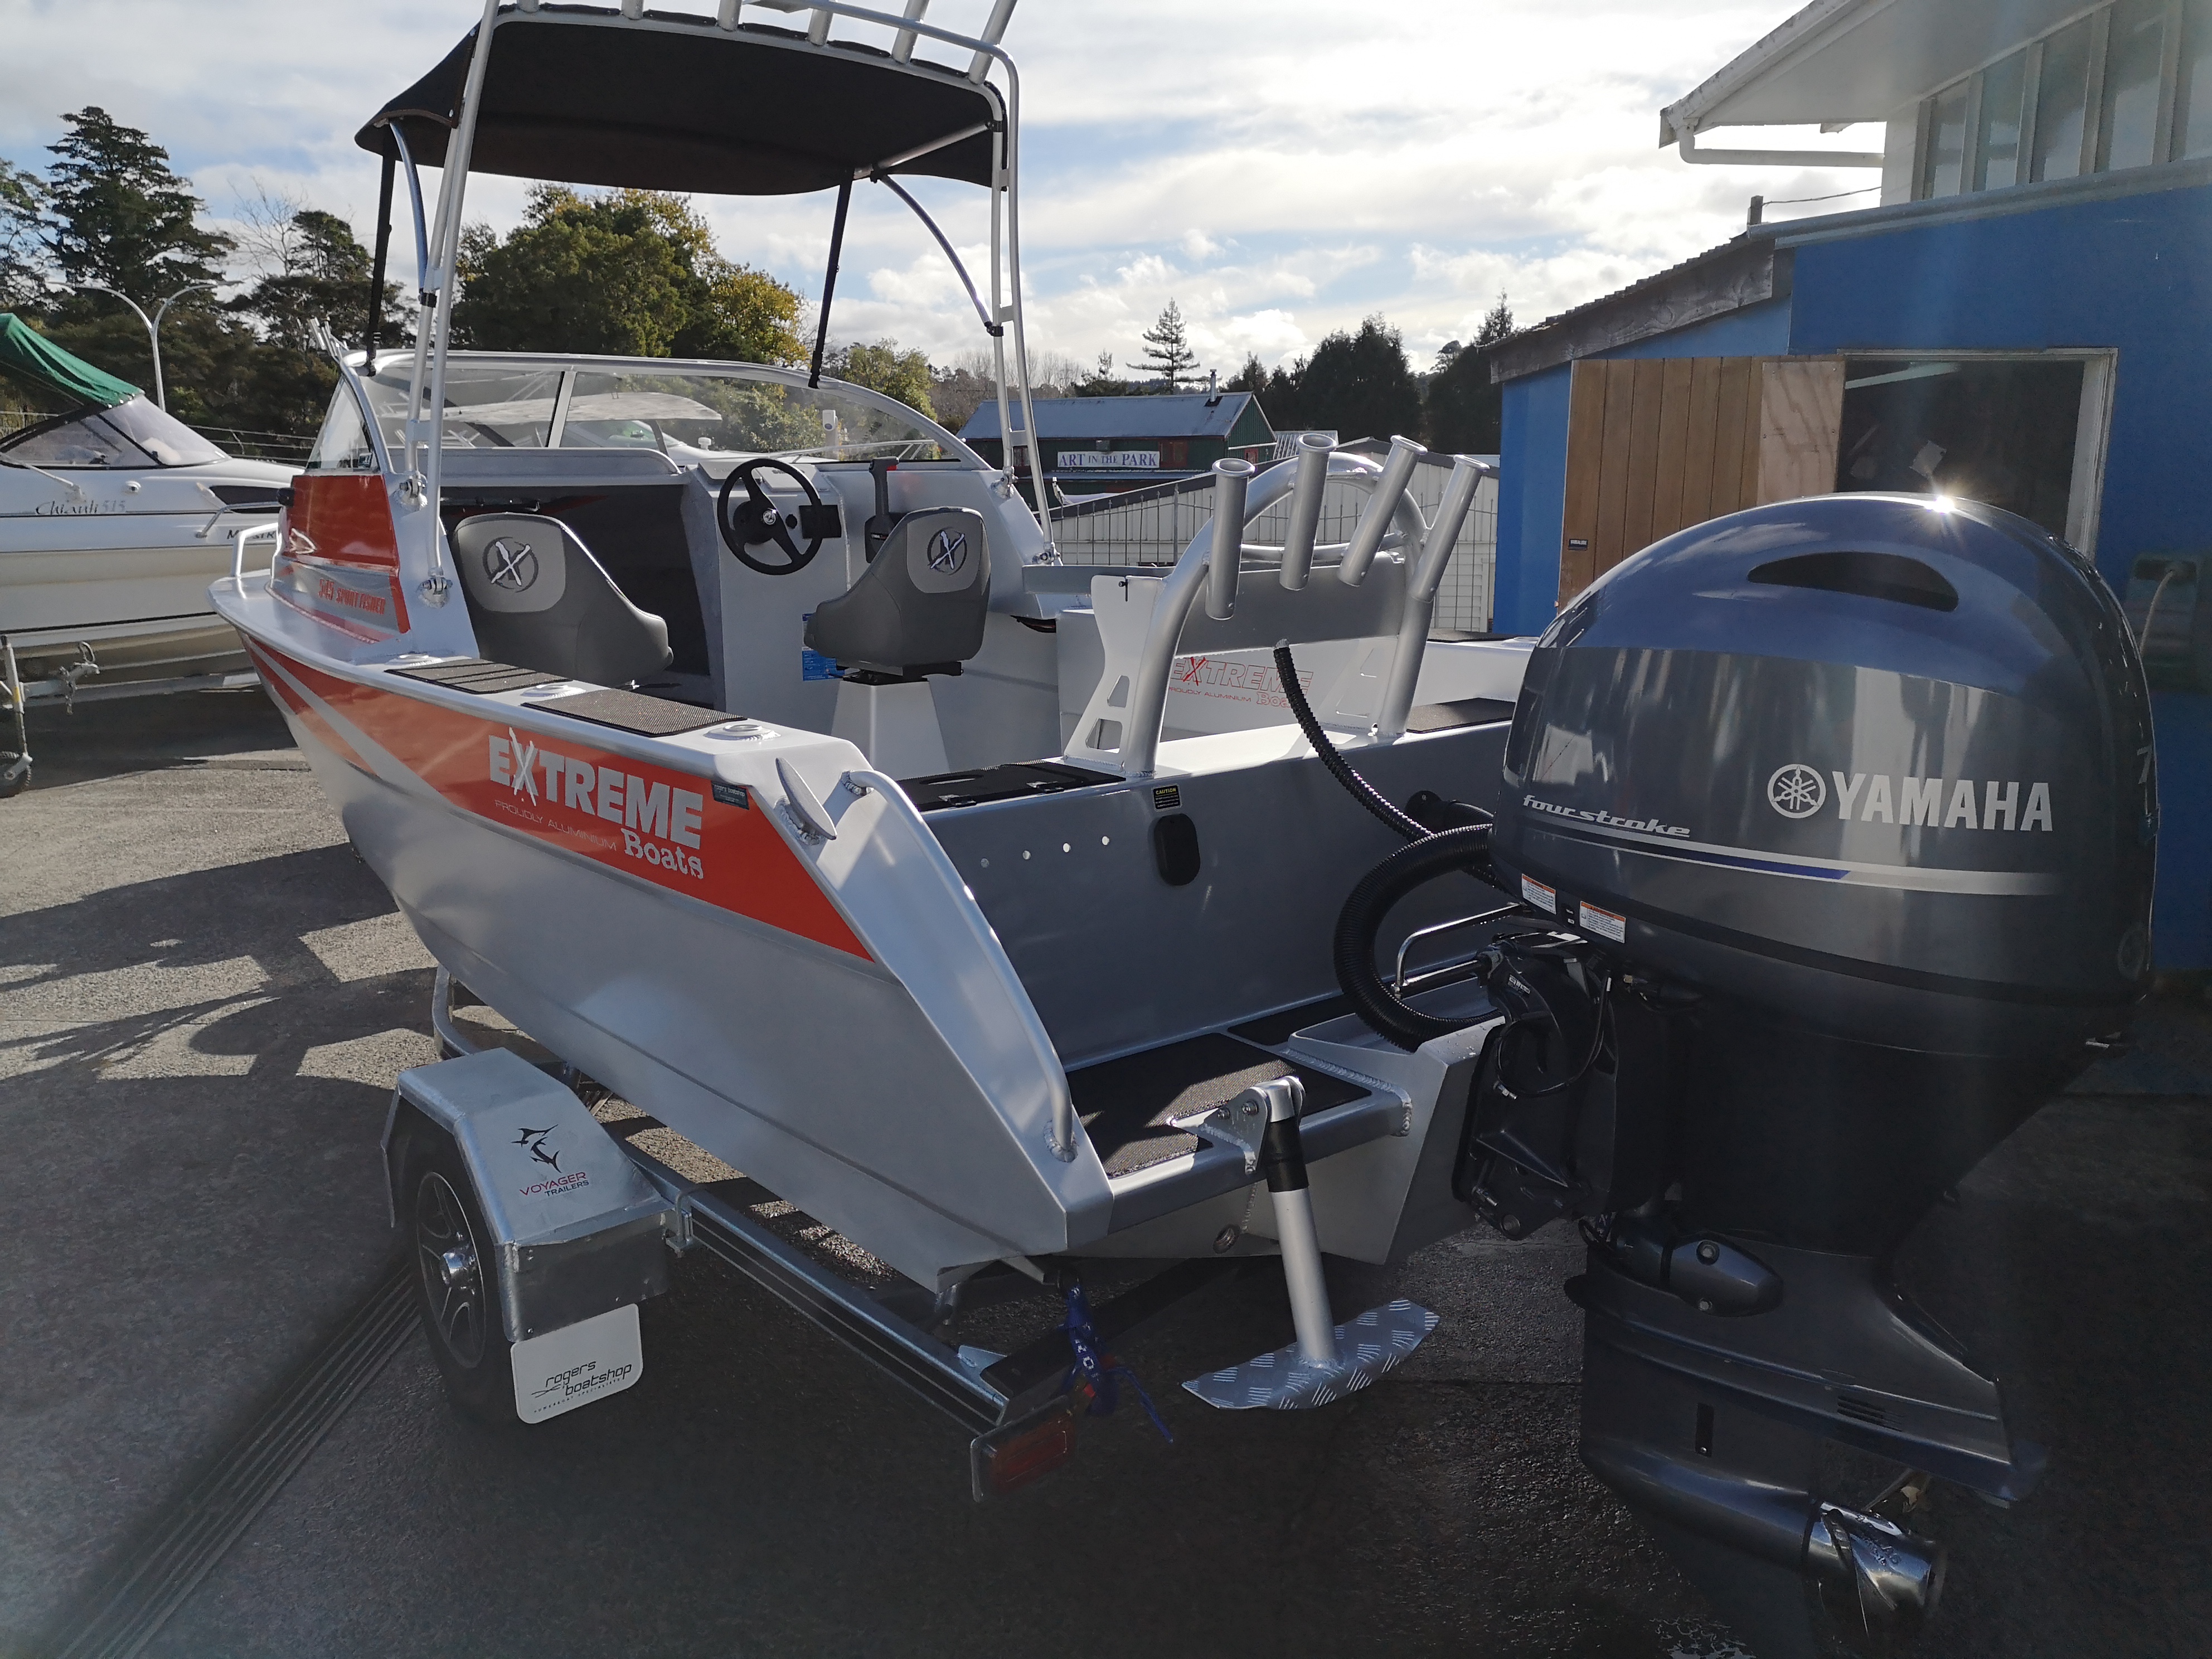 Rogers Boatshop: Extreme / 545 SPORTS FISHER PACKAGE / 2020